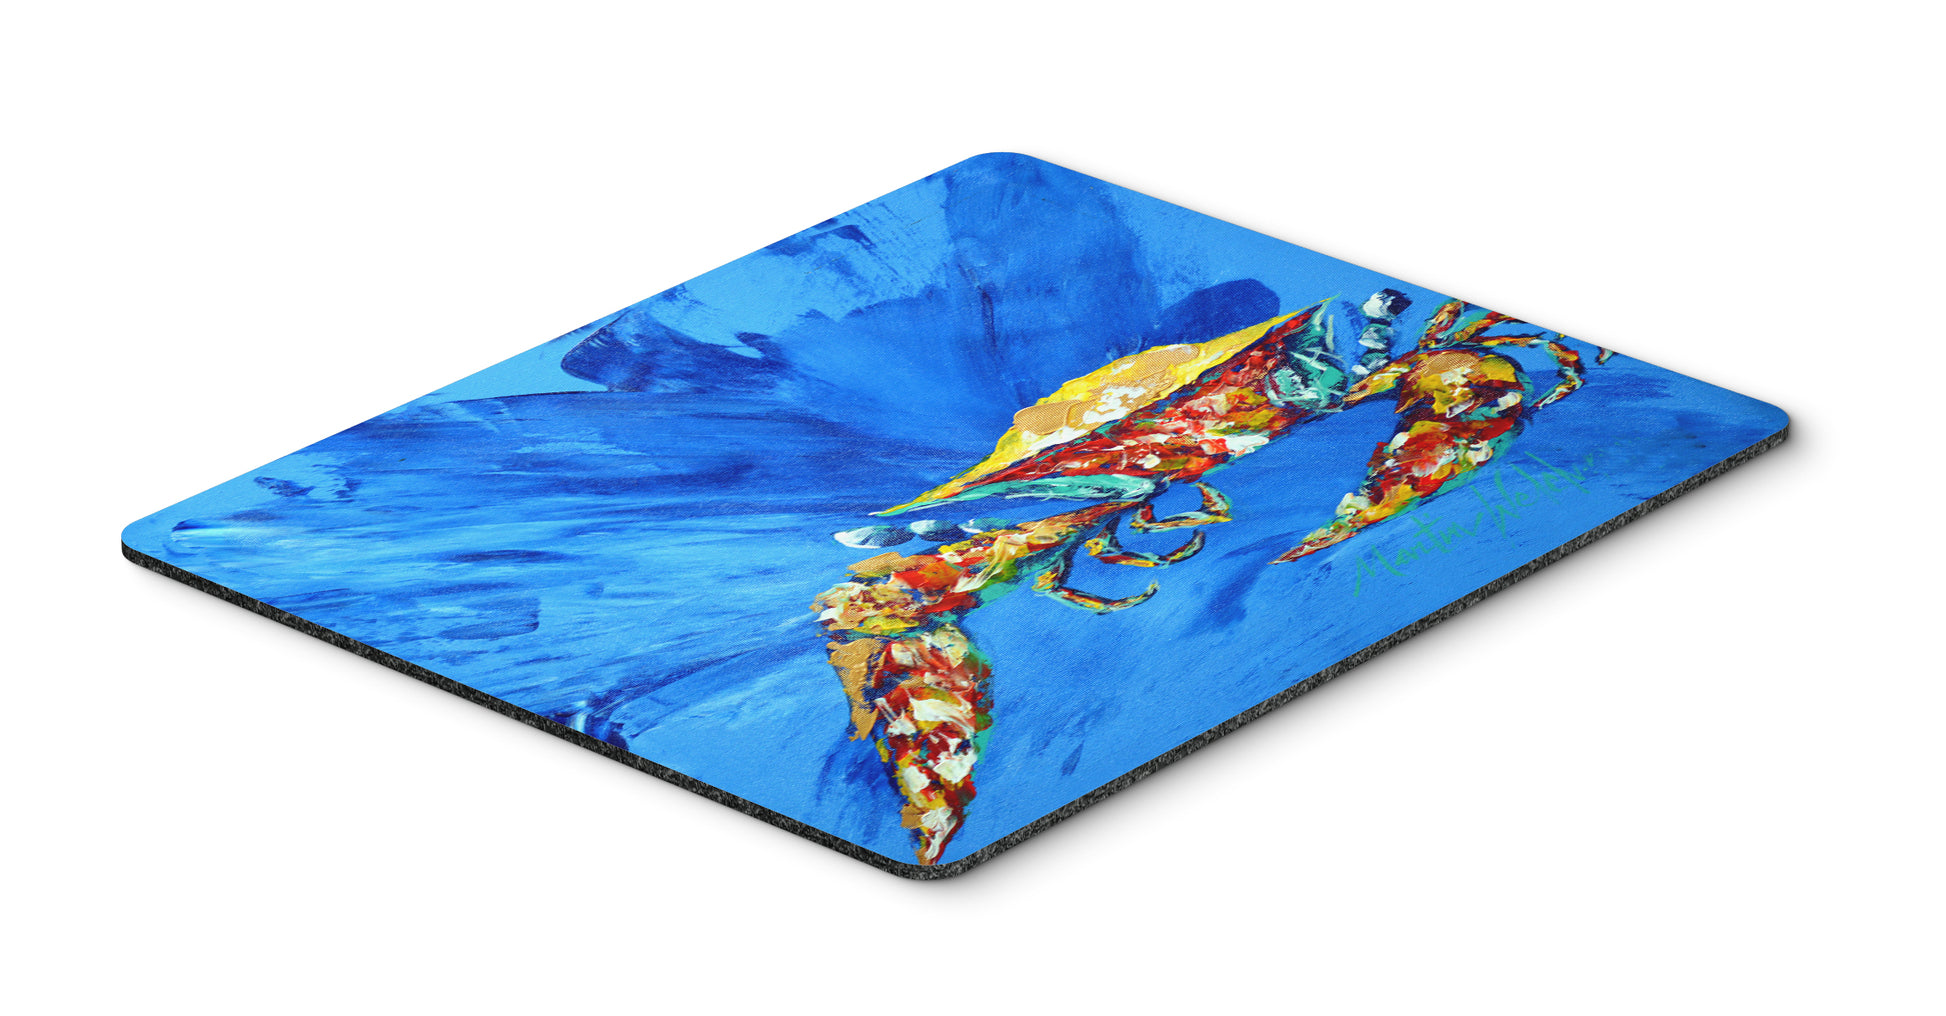 Buy this Big Spash Crab in blue Mouse Pad, Hot Pad or Trivet